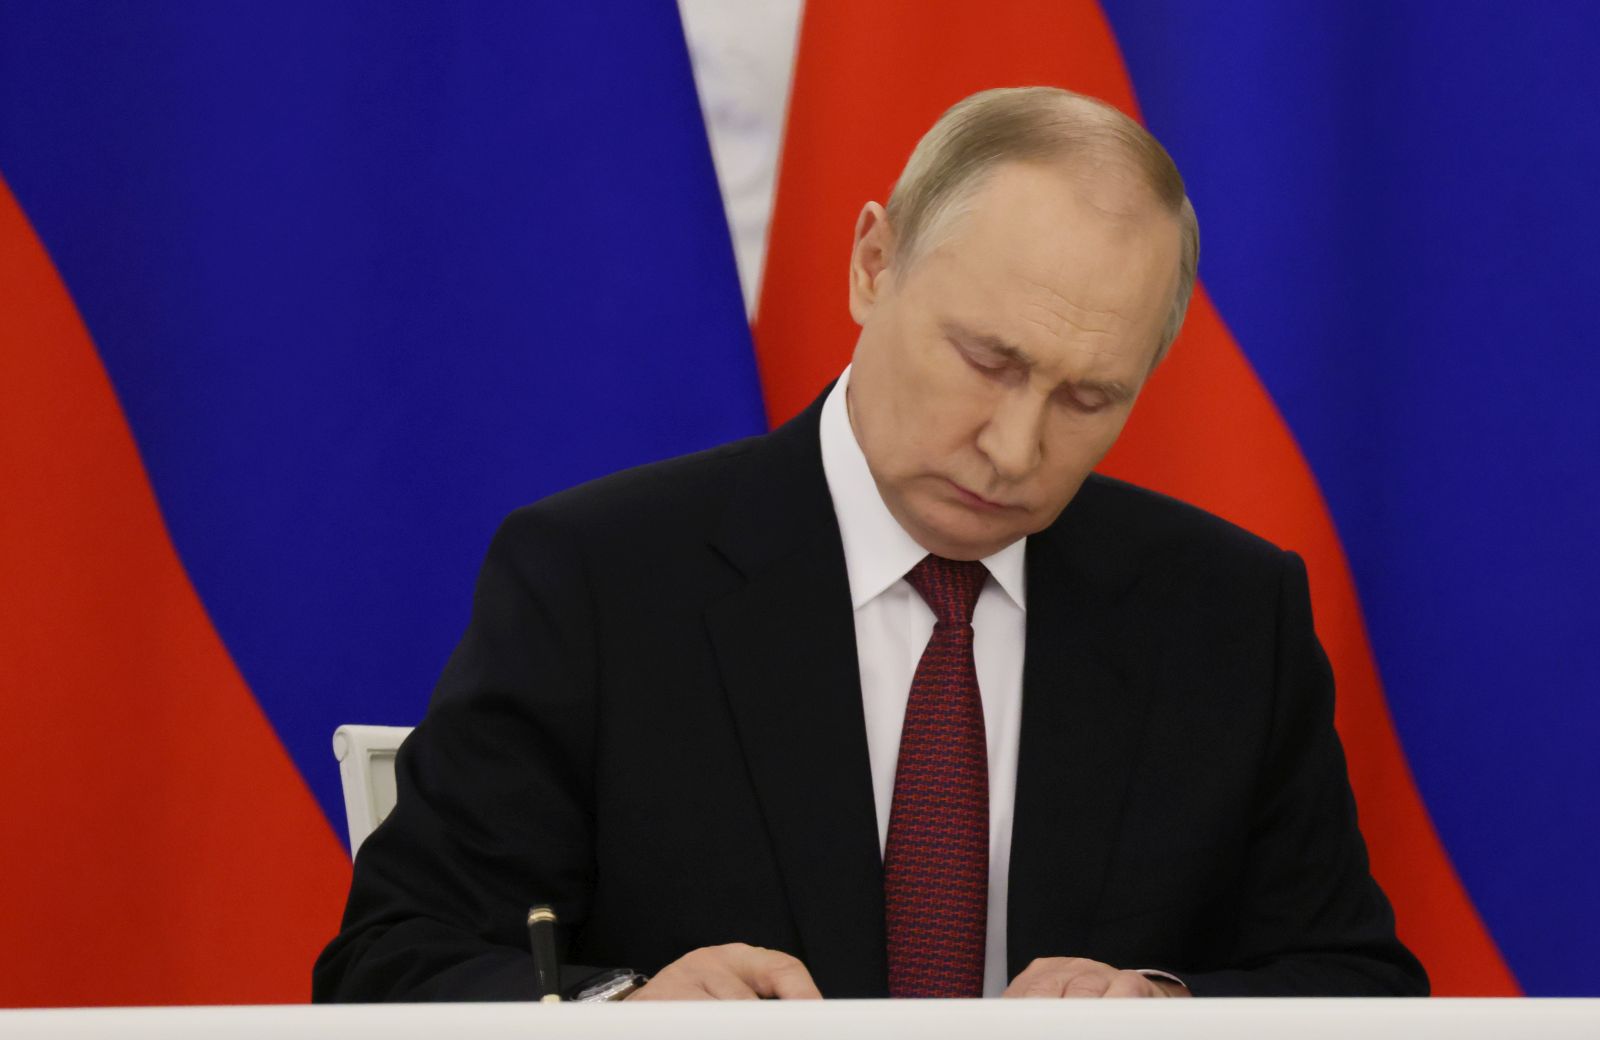 epa10215869 Russian President Vladimir Putin signs documents during a ceremony to sign treaties on new territories' accession to Russia at the Grand Kremlin Palace in Moscow, Russia, 30 September 2022. From 23 to 27 September, residents of the self-proclaimed Luhansk and Donetsk People's Republics as well as the Russian-controlled areas of the Kherson and Zaporizhzhia regions of Ukraine voted in a so-called 'referendum' to join the Russian Federation.  EPA/MIKHAIL METZEL / SPUTNIK / KREMLIN POOL MANDATORY CREDIT